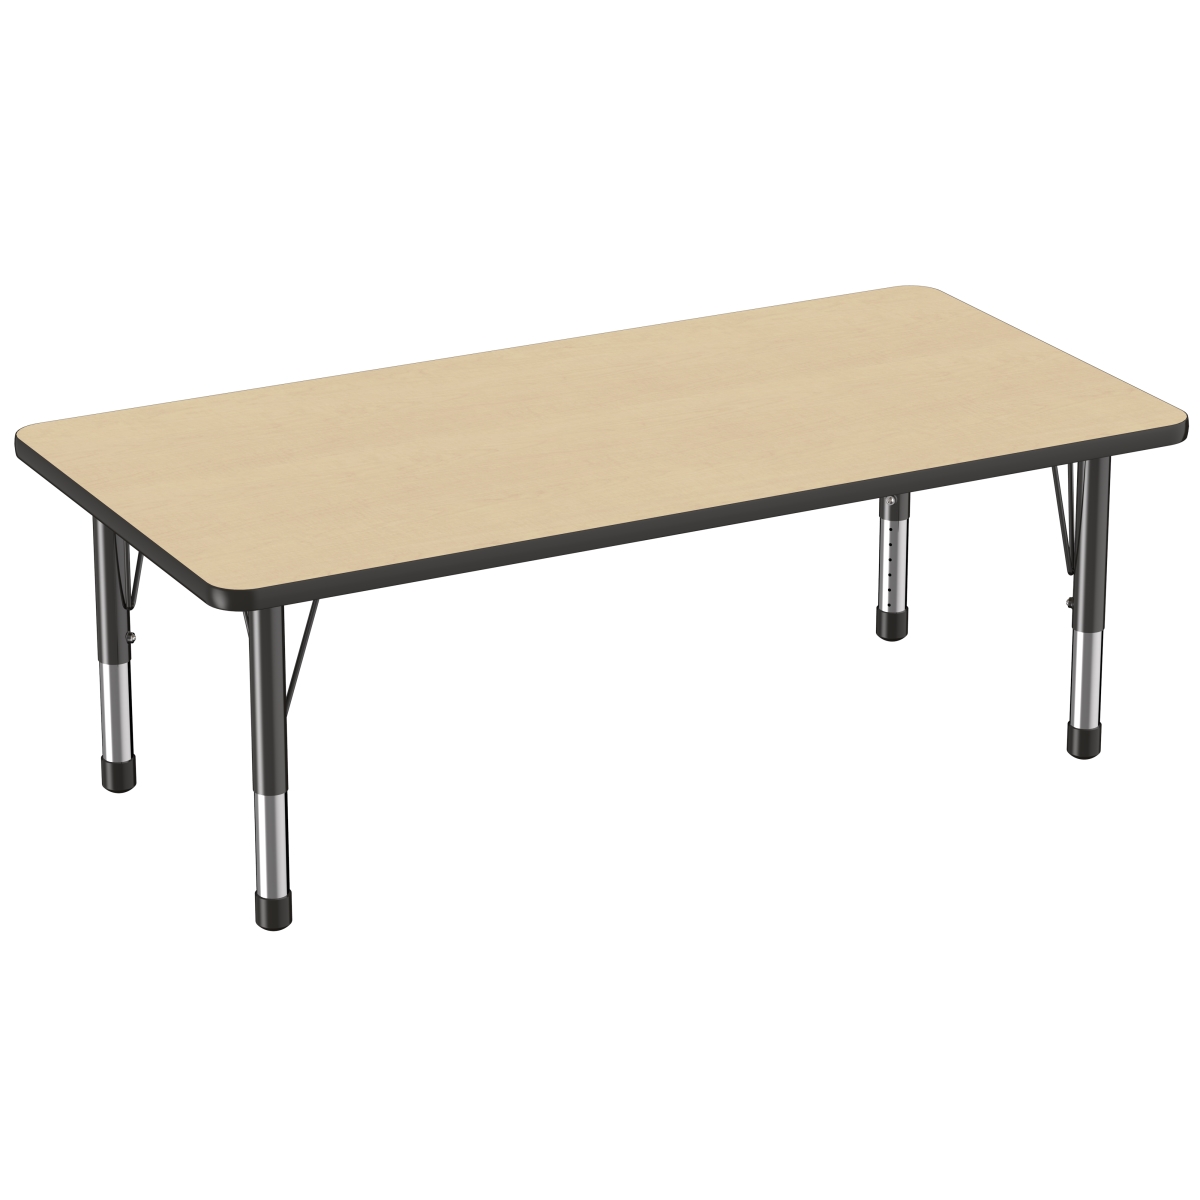 10025-mpbk 30 X 60 In. Rectangle T-mold Adjustable Activity Table With Chunky Leg - Maple & Black